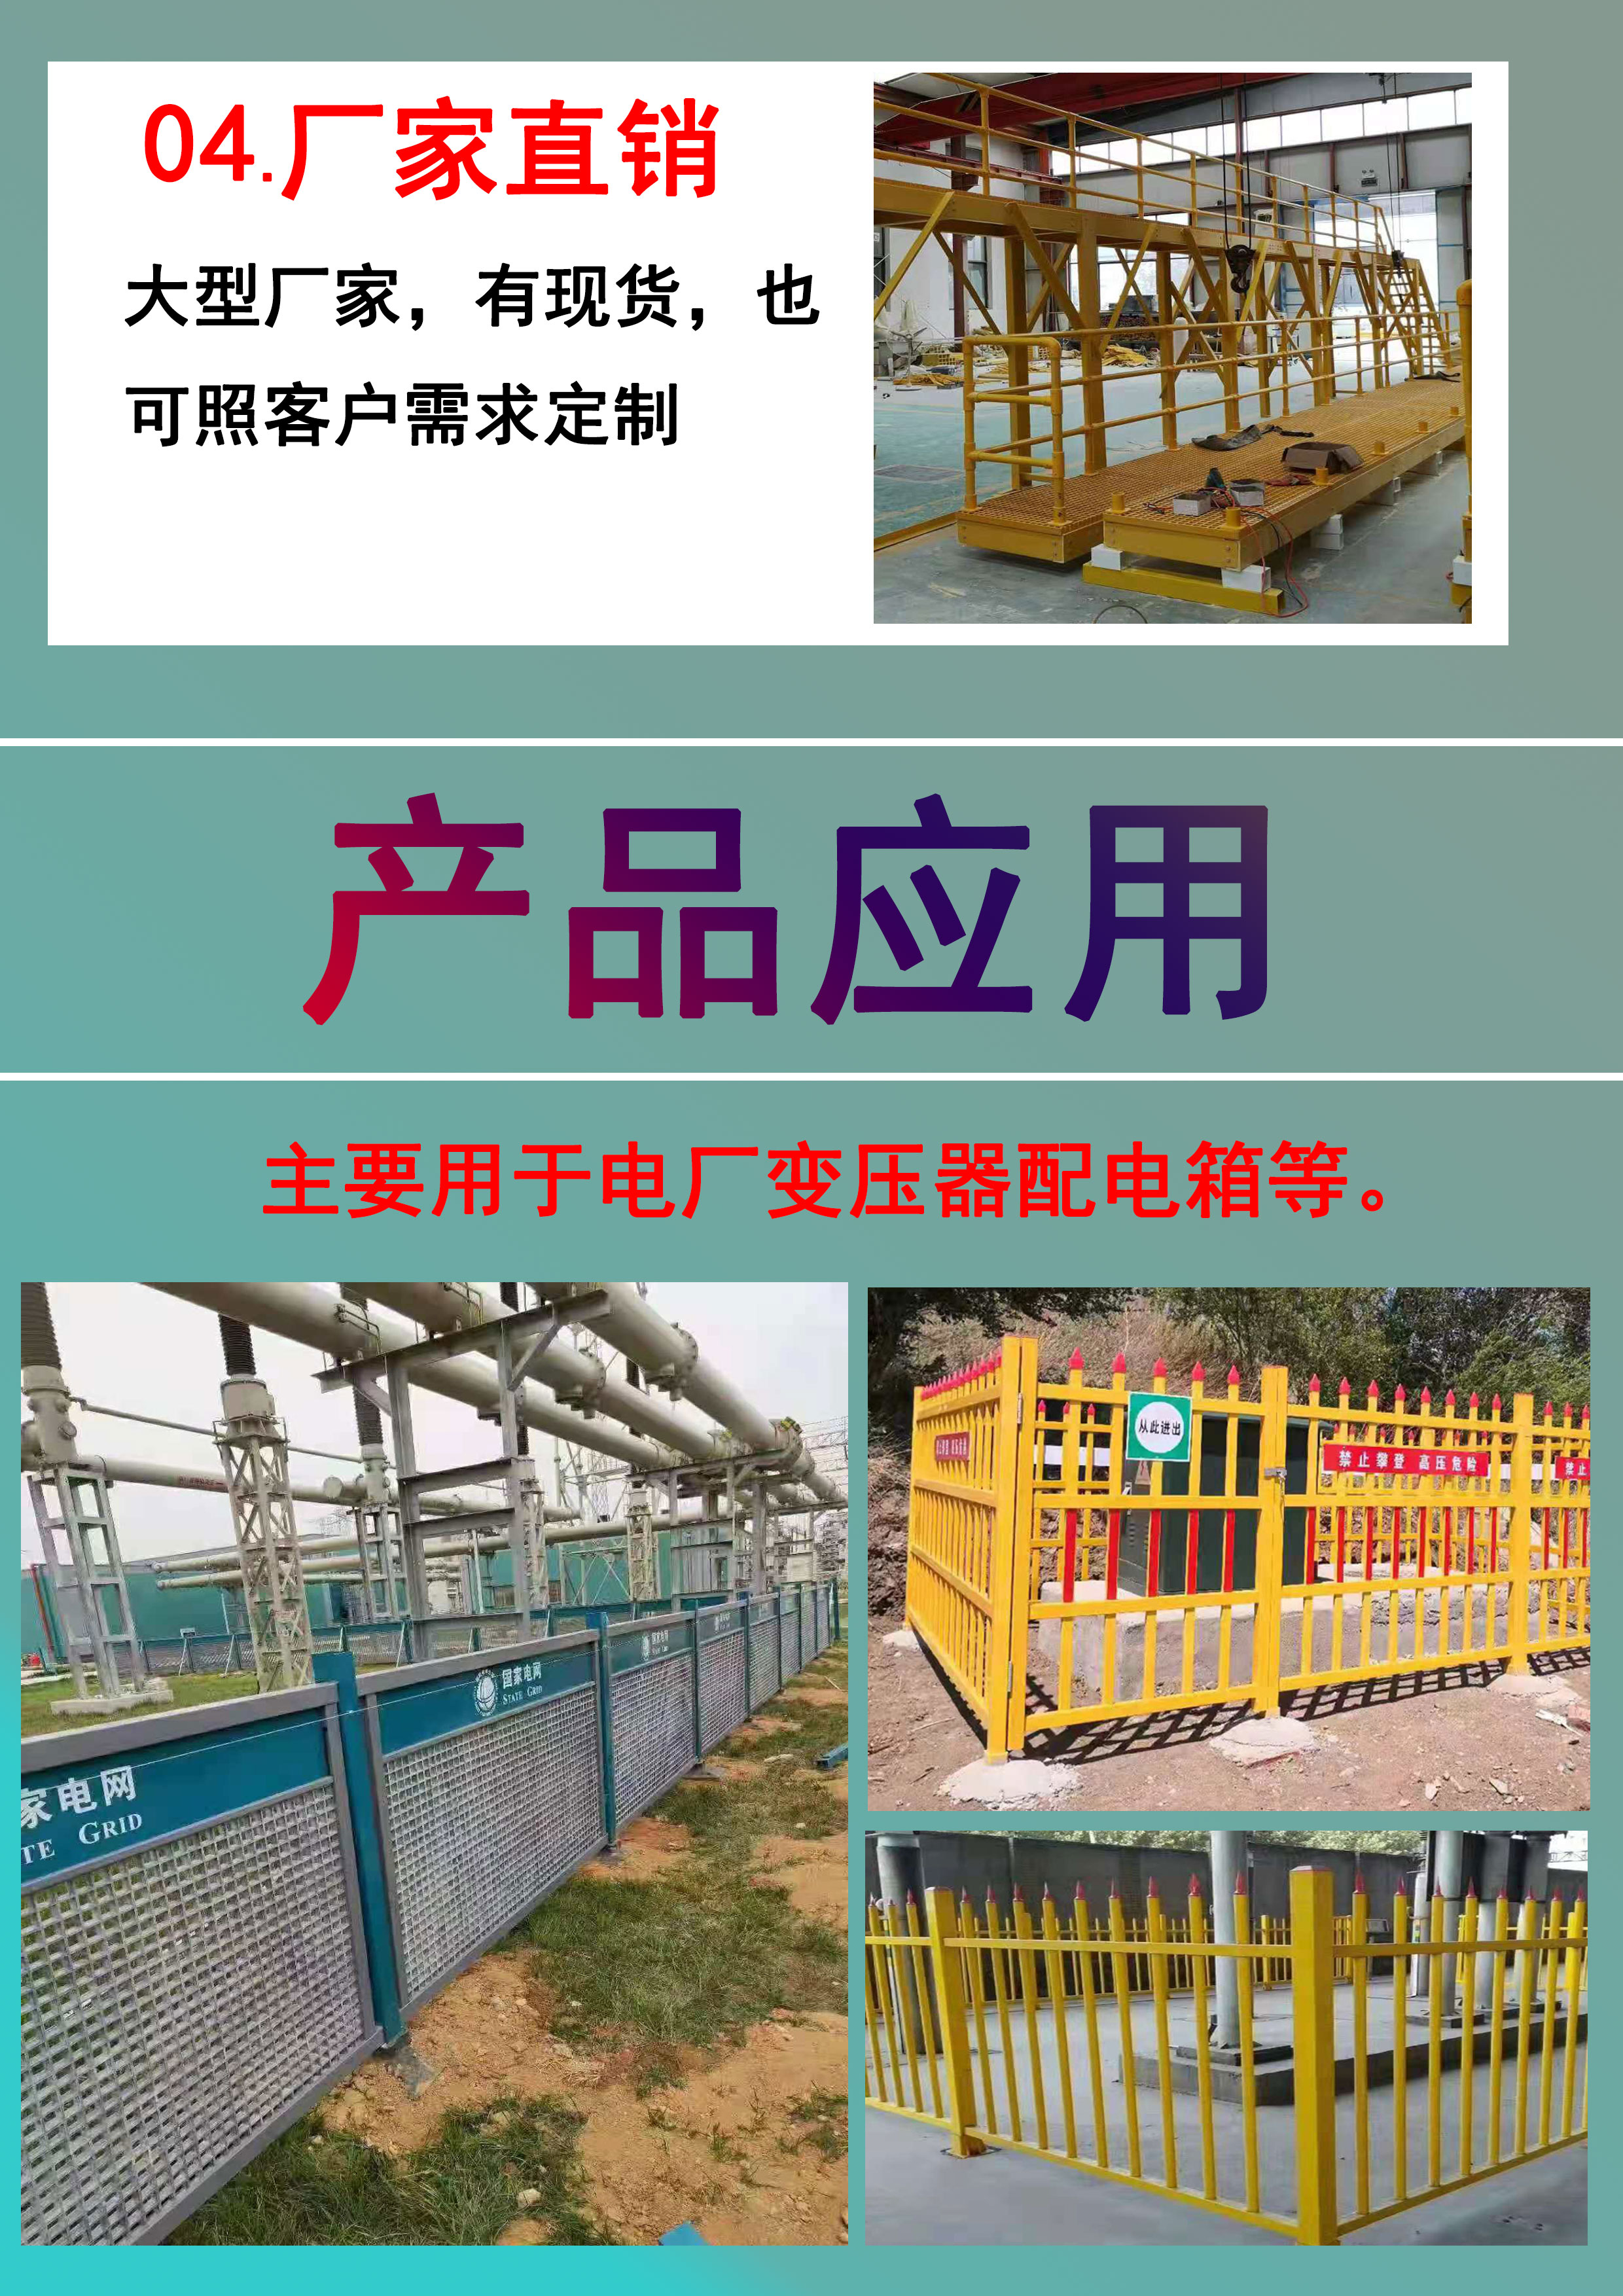 Insulated guardrail, Jiahang fiberglass fence, transformer isolation fence, outdoor cable protection fence